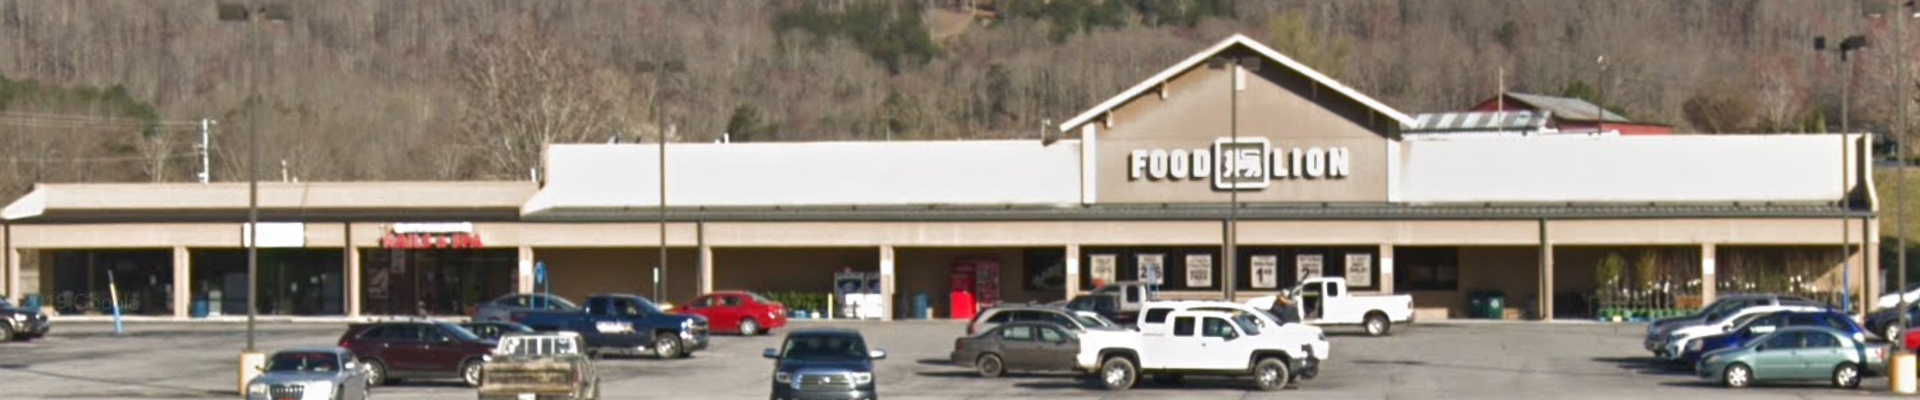 Valley View Shopping Center – LaFollette, Tennessee